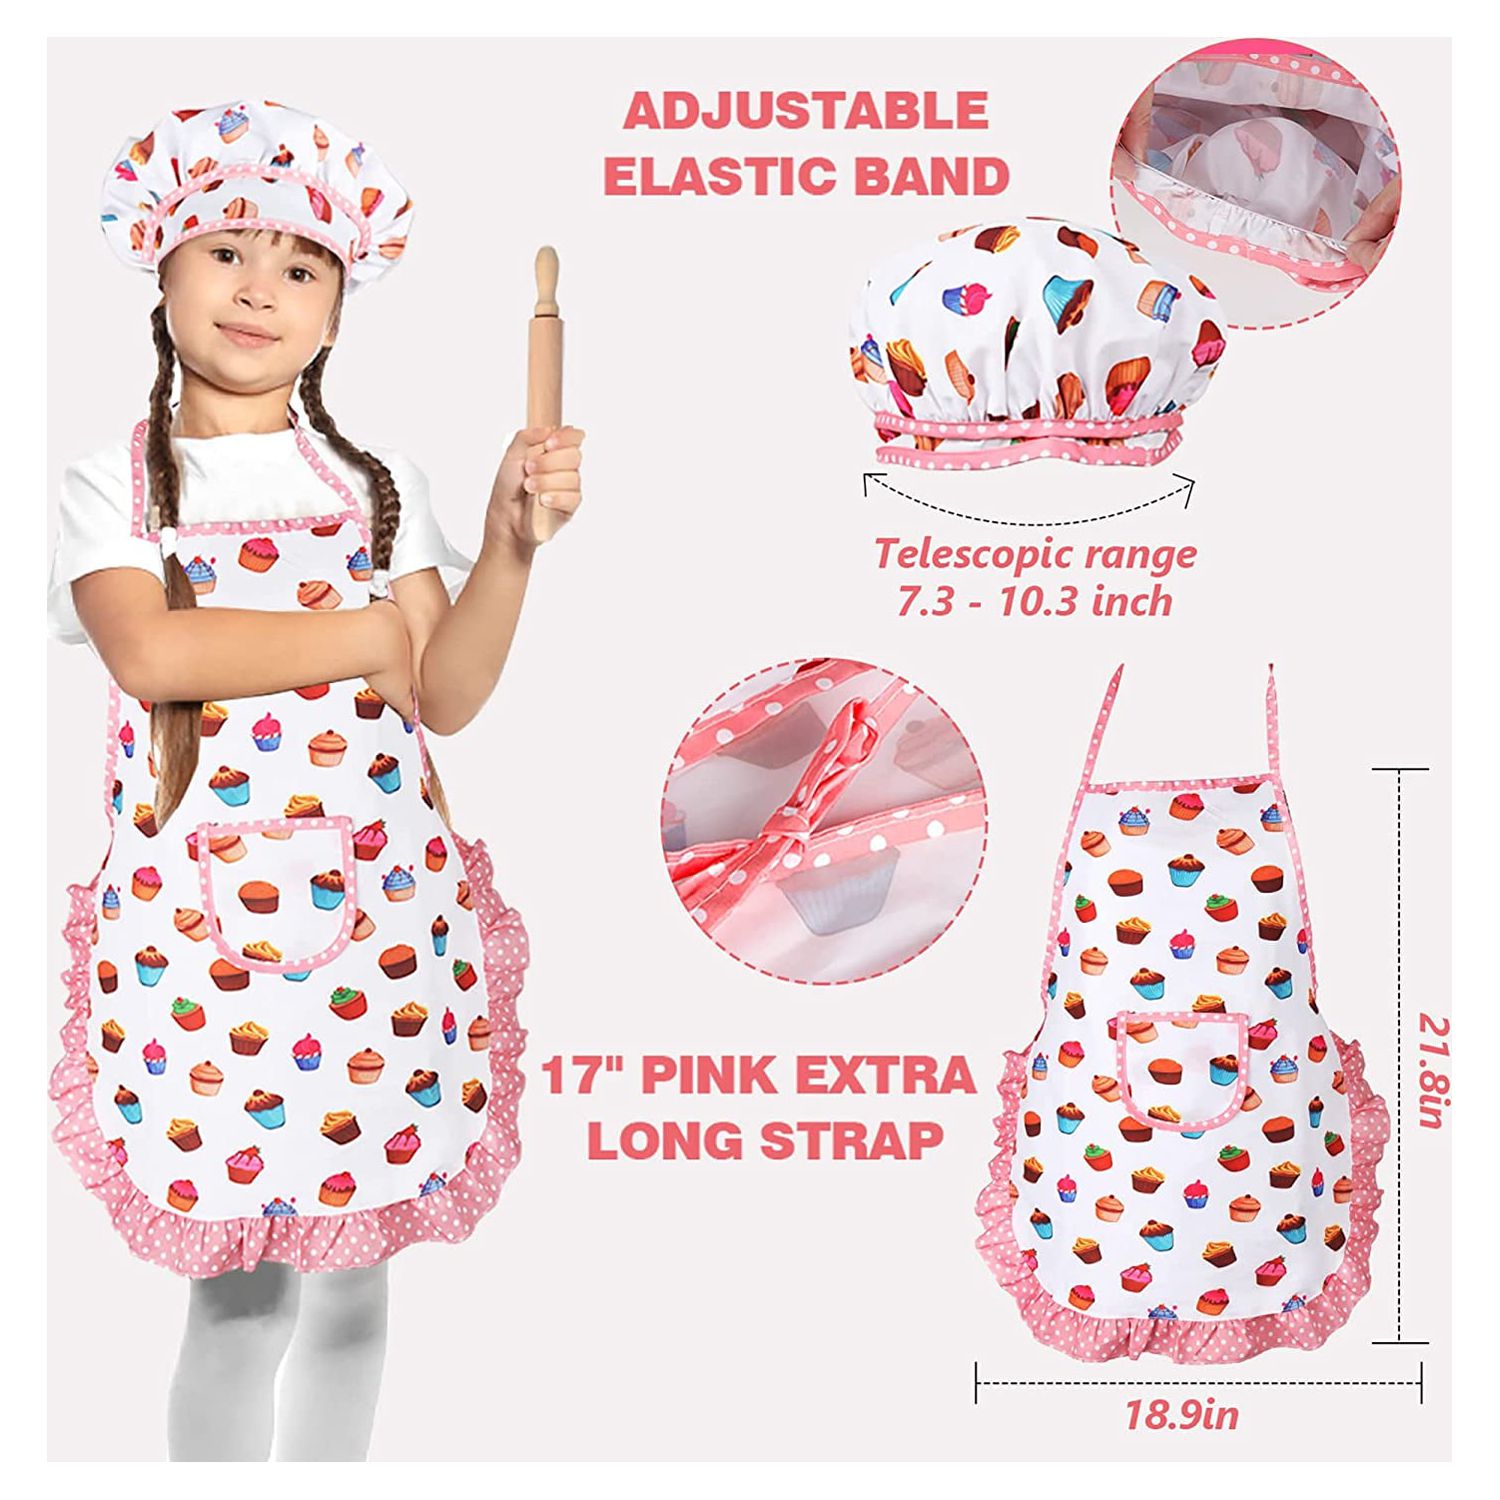 Vanmor Cute Kids Cooking and Baking Set, 24 Pcs Kids Aprons for Girls Toddler Chef Hat Apron Dress Up Chef Costume , Little Girl Apron Set Pretend